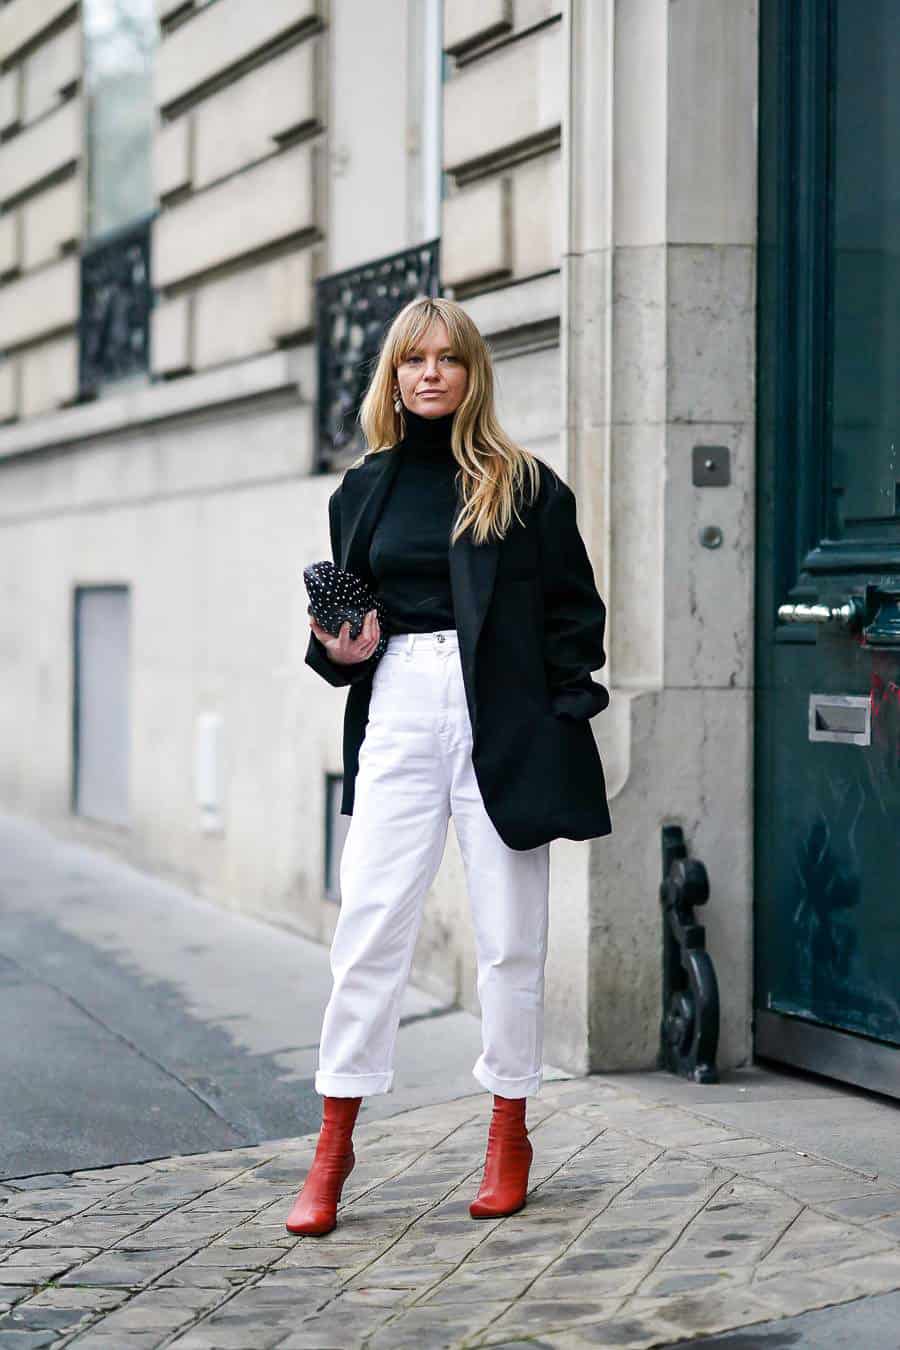 Jeanette Madsen wears earrings, a black turtleneck pullover, a black oversized blazer jacket, white pants, red leather boots, a black bag with polka dots